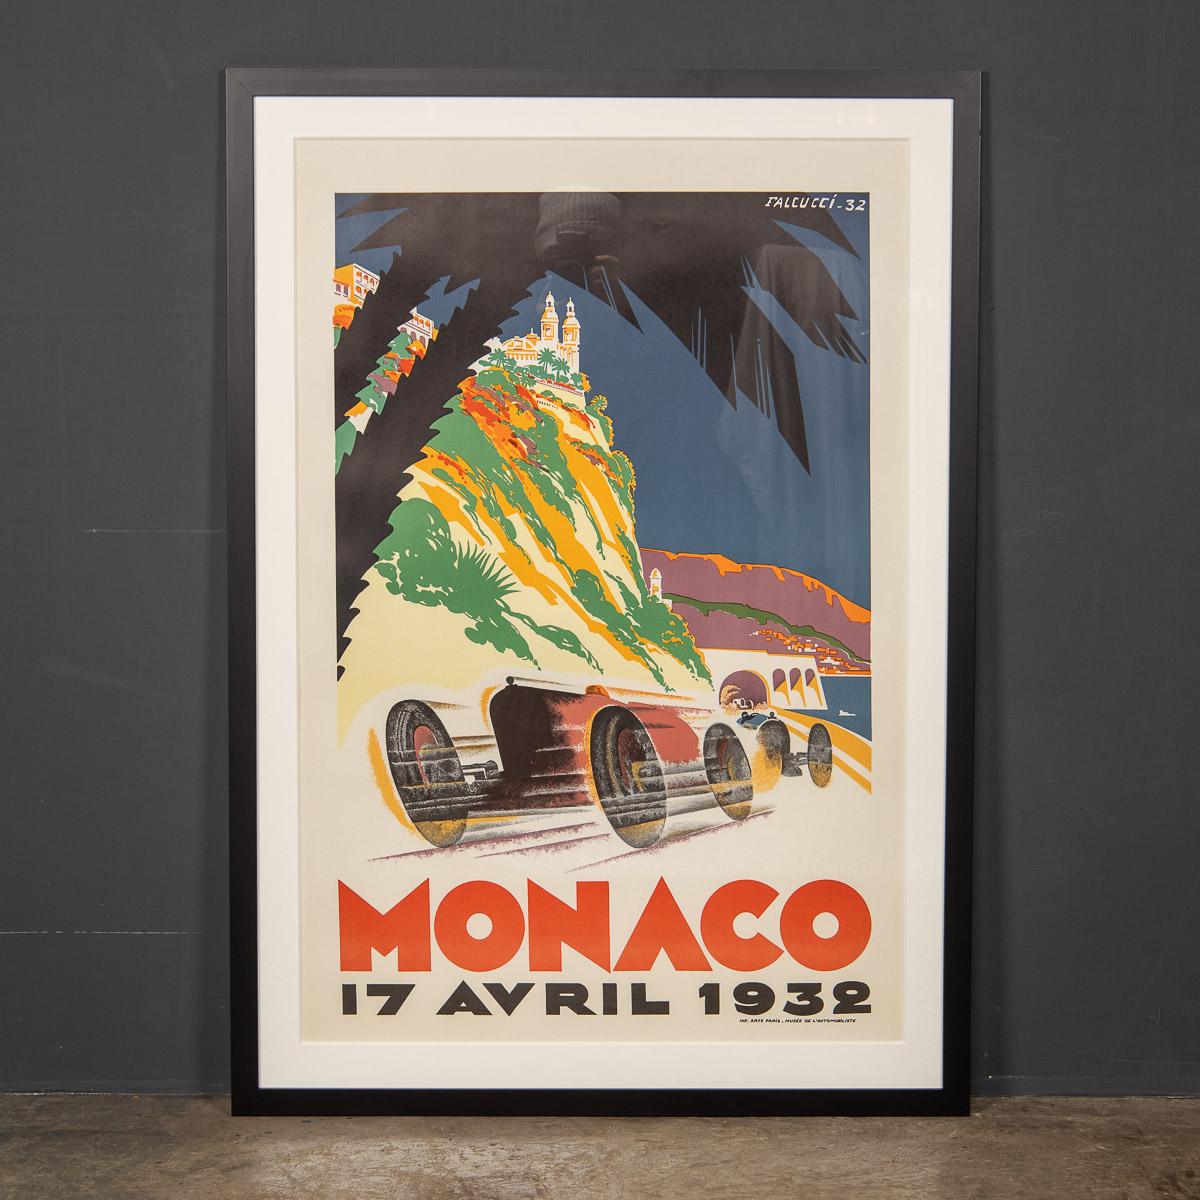 A 20th Century Reprint (circa 1960s) of the Monaco 1932 Grand-prix poster, signed Falcucci, 32.

This superb posters comes with a timeless made to measure frame.


Condition
In Great Condition - No Damage.

Size
Width: 82cm
Height: 116cm.